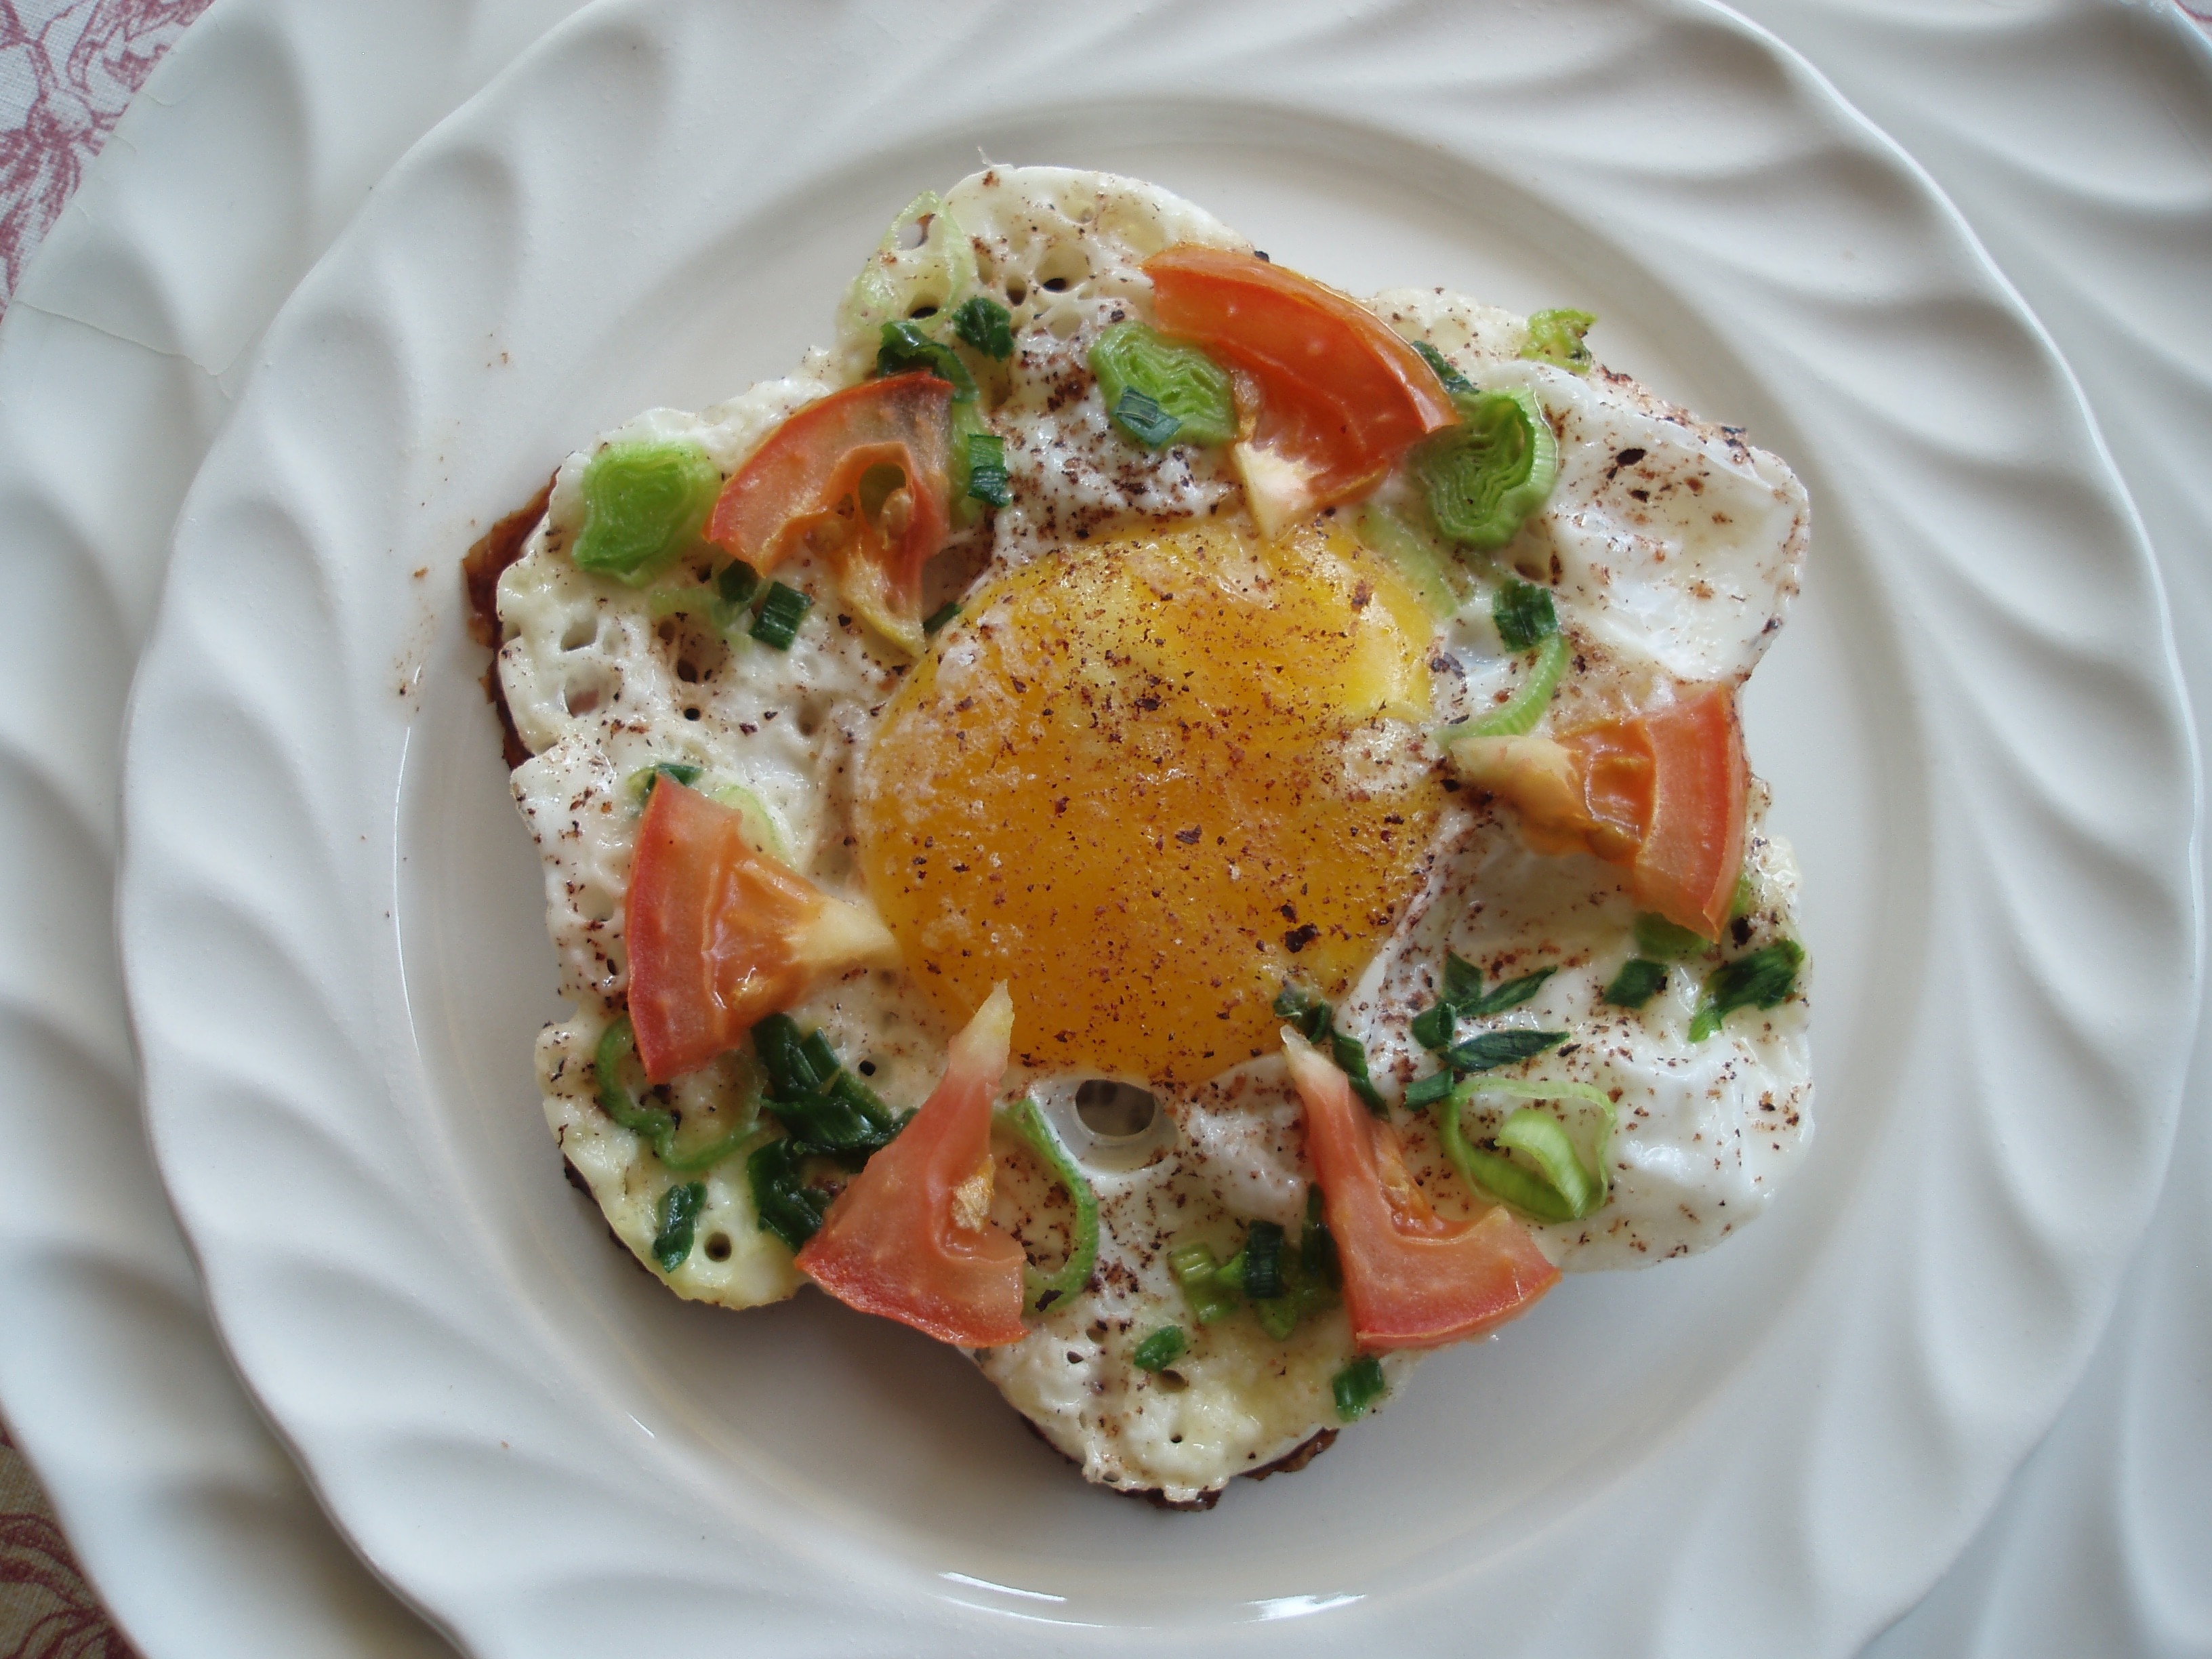 sunny side up with red tomato and green leaf vegetables